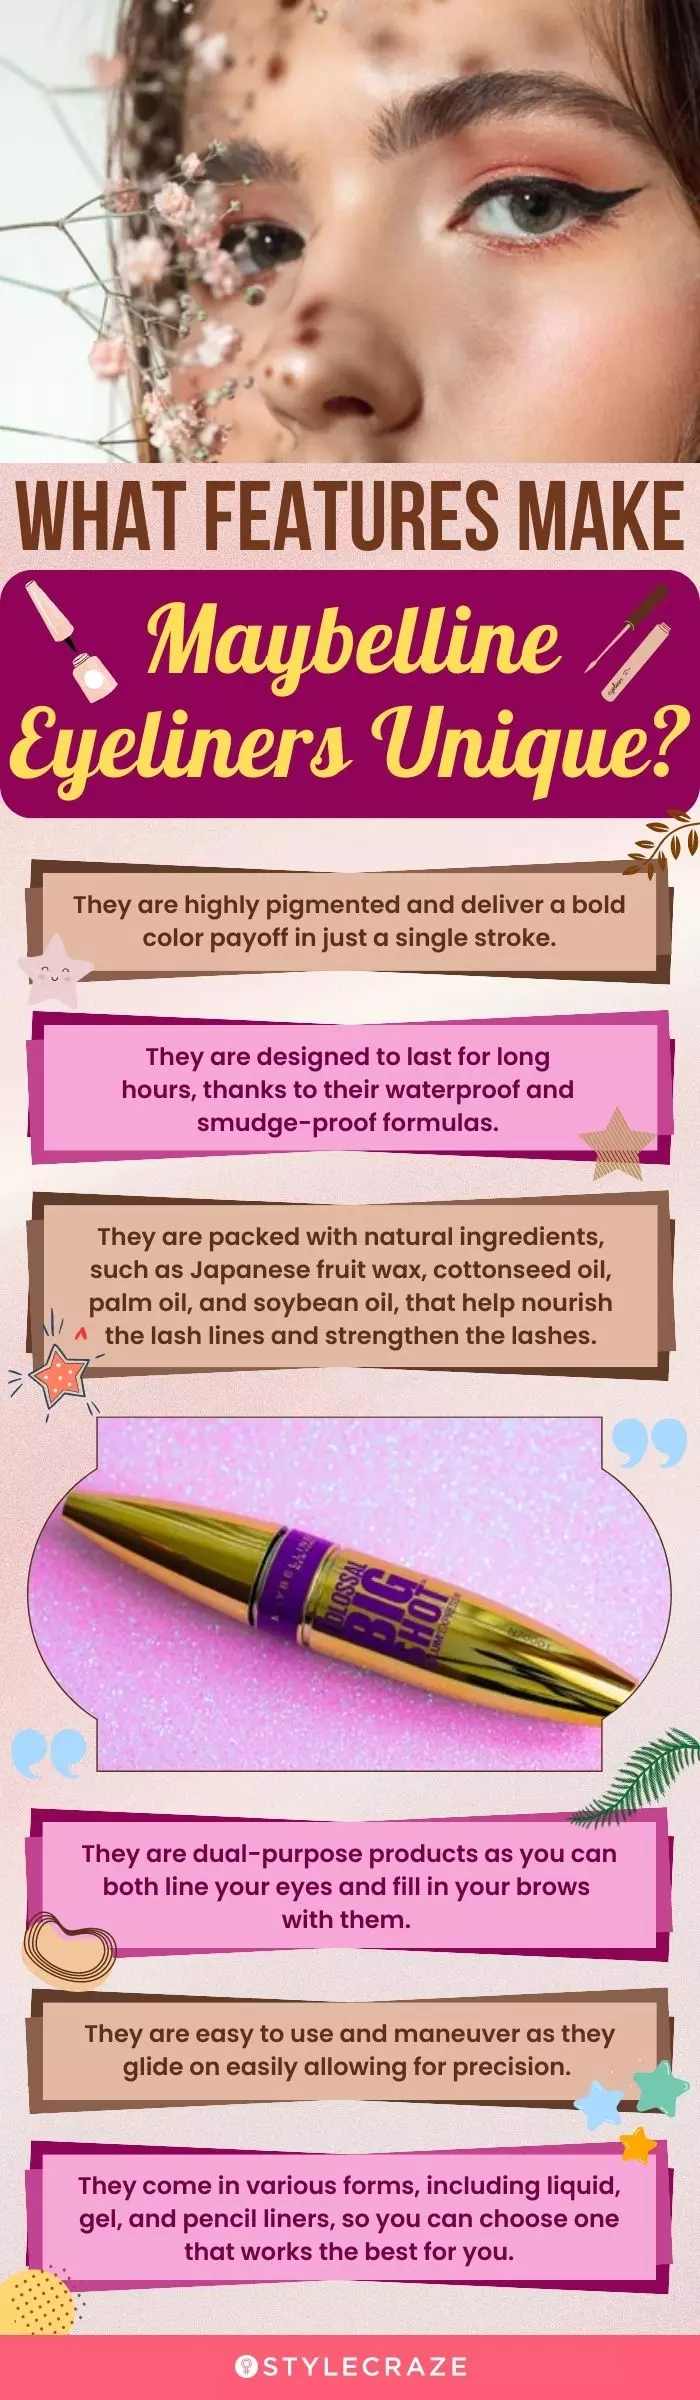 What Features Make Maybelline Eyeliners Unique? (infographic)